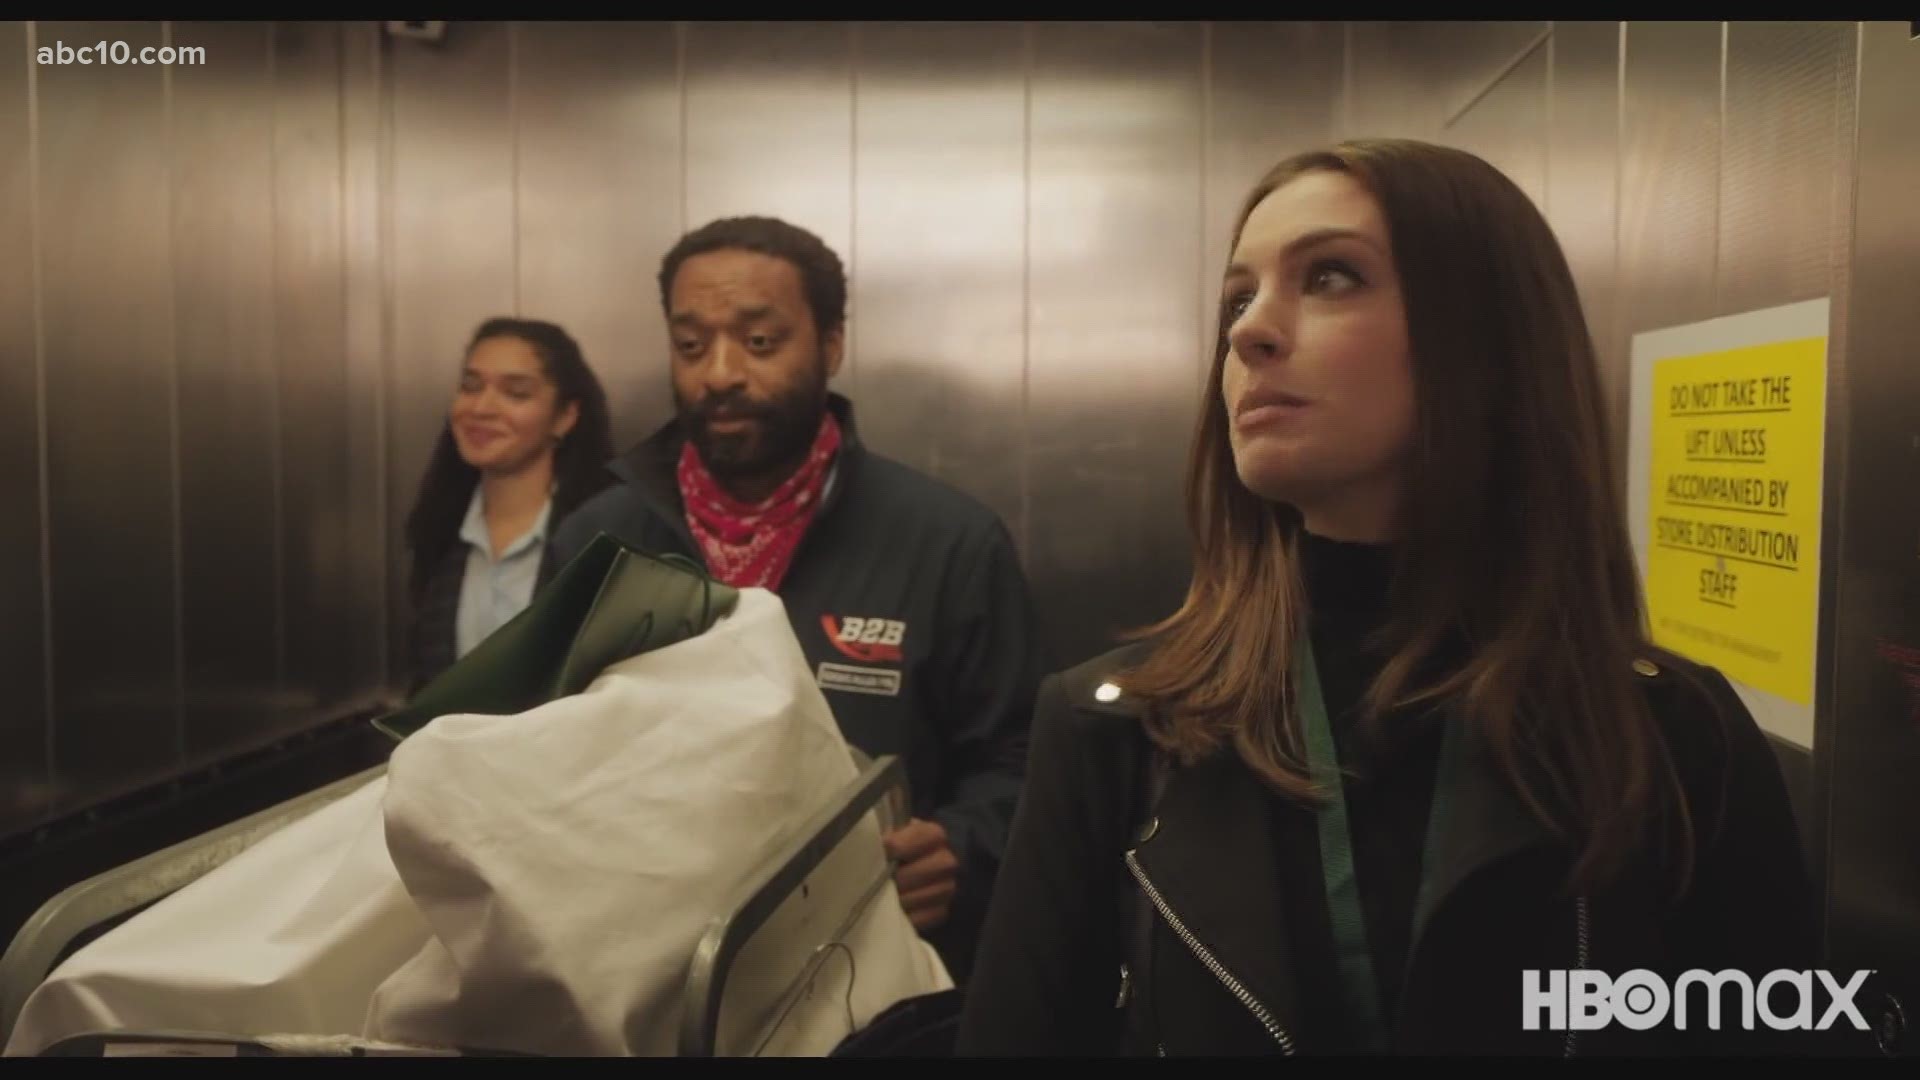 Anne Hathaway & Chiwetel Ejiofor talk about new movie 'Locked Down'